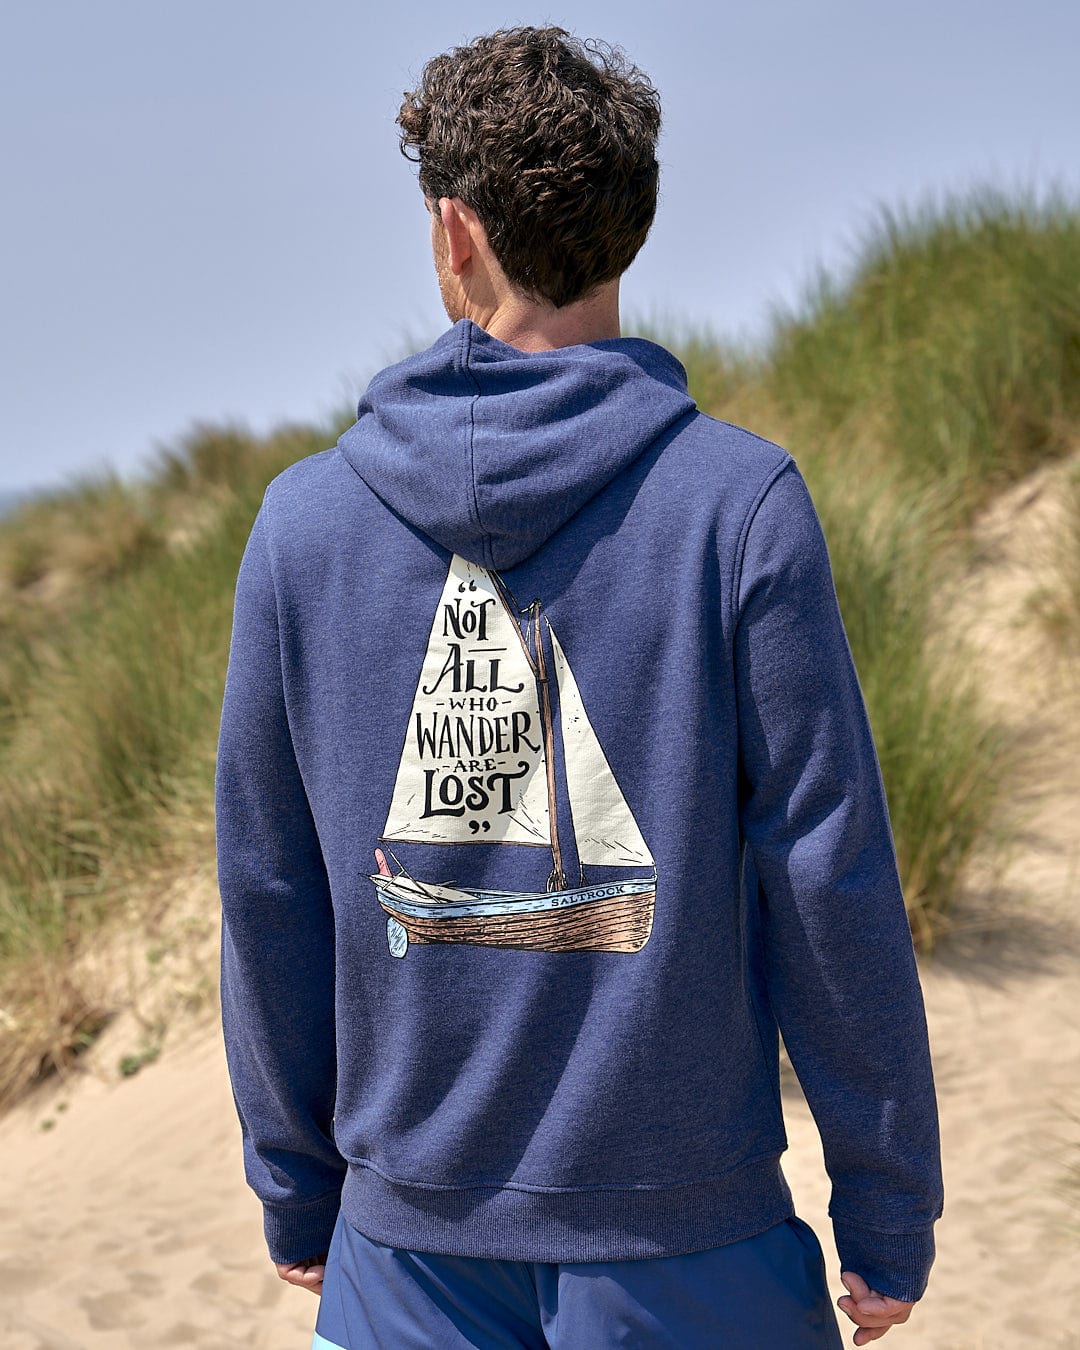 The man with a Lost Ships - Mens Pop Hoodie - Blue Marl on his Saltrock hoodie looks lost as he wanders through the crowd.